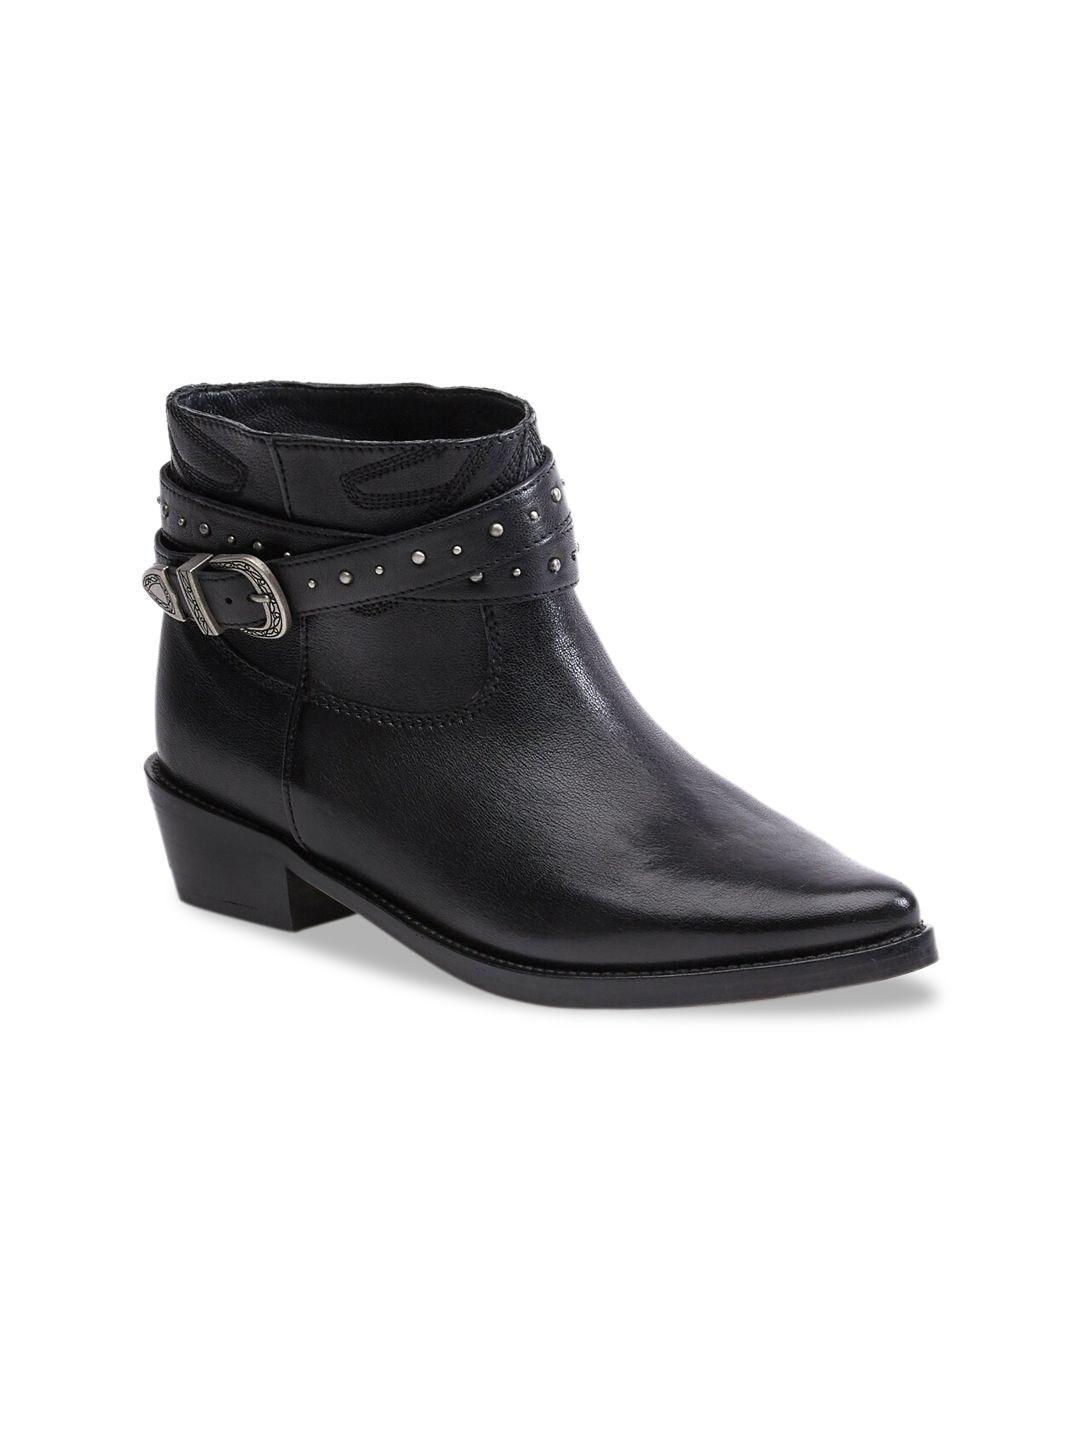 saint g women black solid leather heeled boots